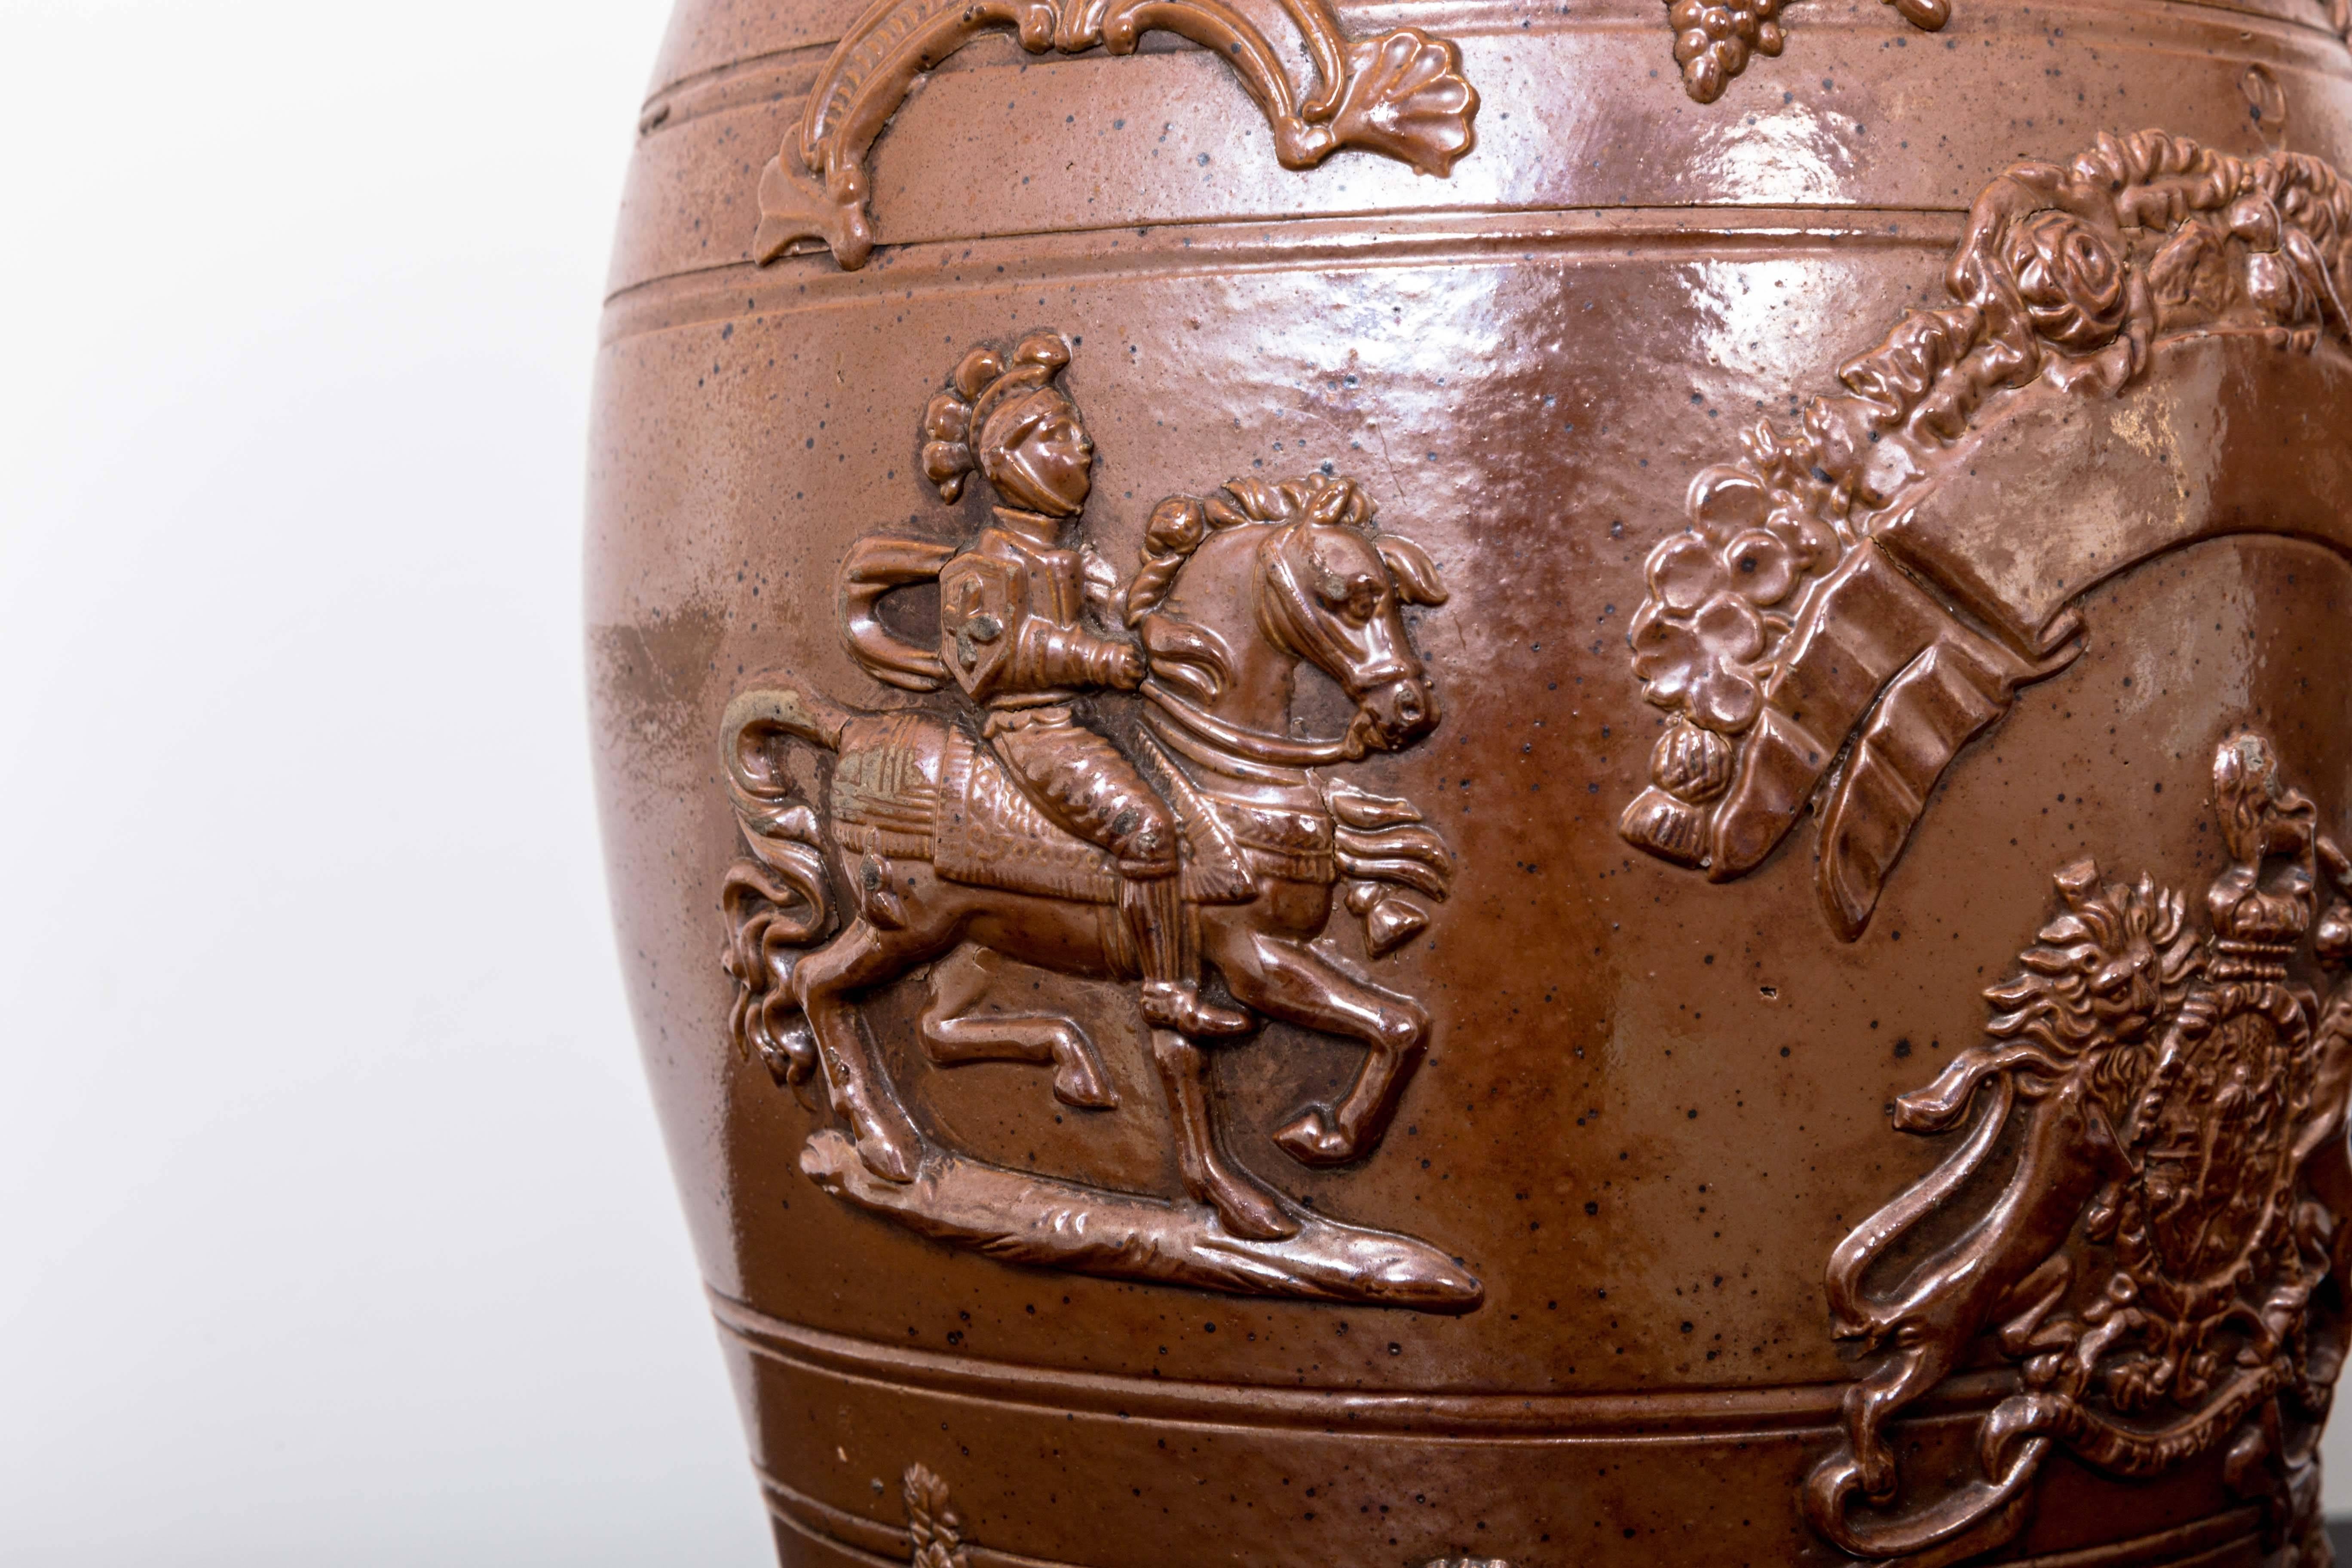 English salt glazed stoneware spirits dispenser, barrel form, decorated with bas-relief motifs; including royal coat of arms, knights on horseback, lions, banner and garland with wooden spigot and cork top.